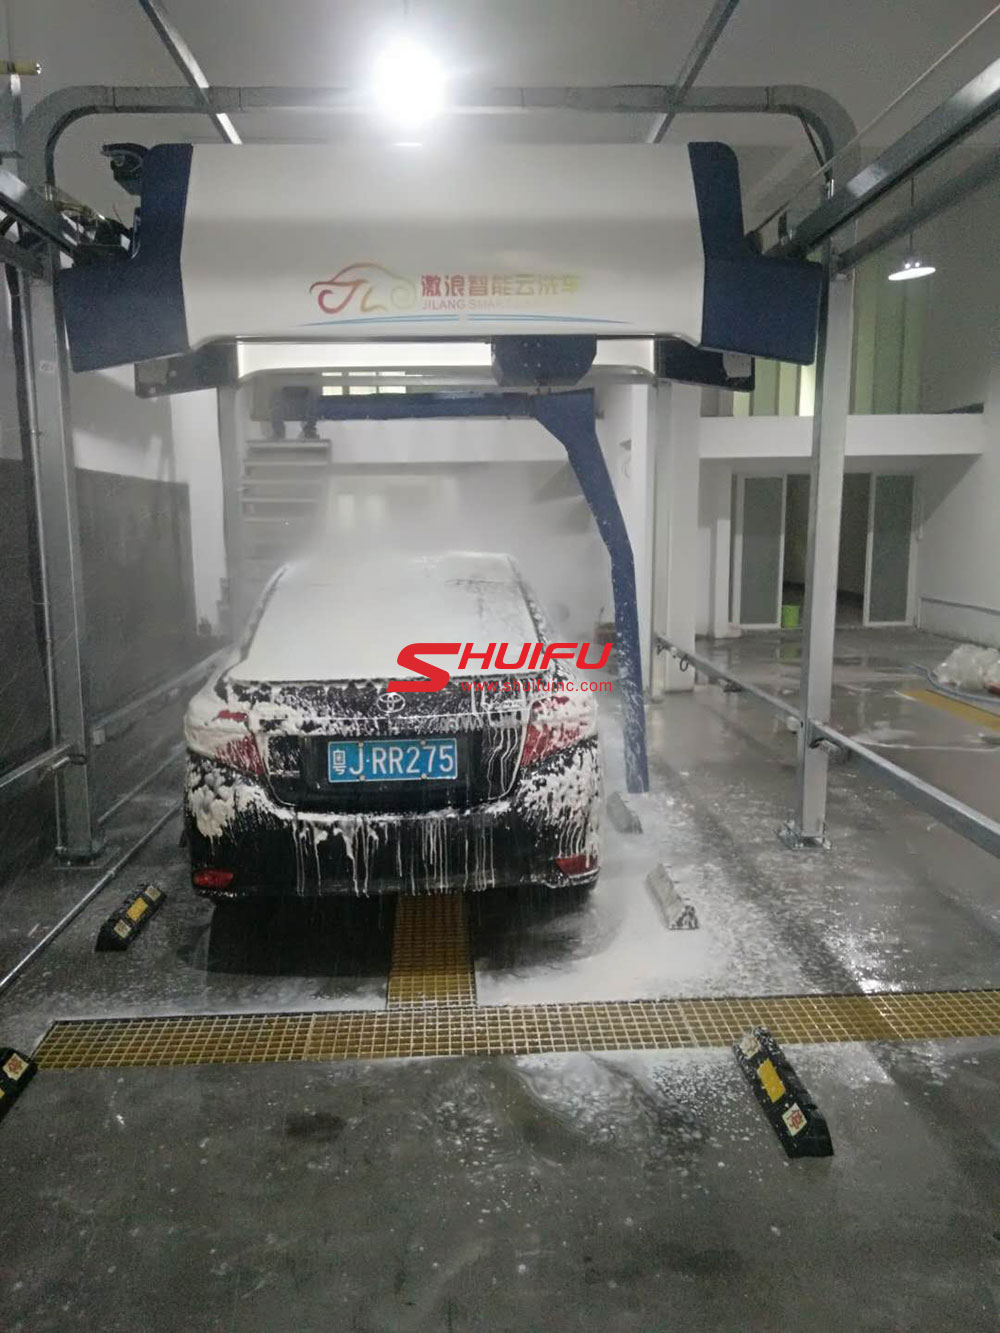 Automatic-car-wash-machine-AXE-OVERHEAD-touchless-carwash-system-installation-finished-in-Asia-manufactured-by-SHUIFU-CHINA-7